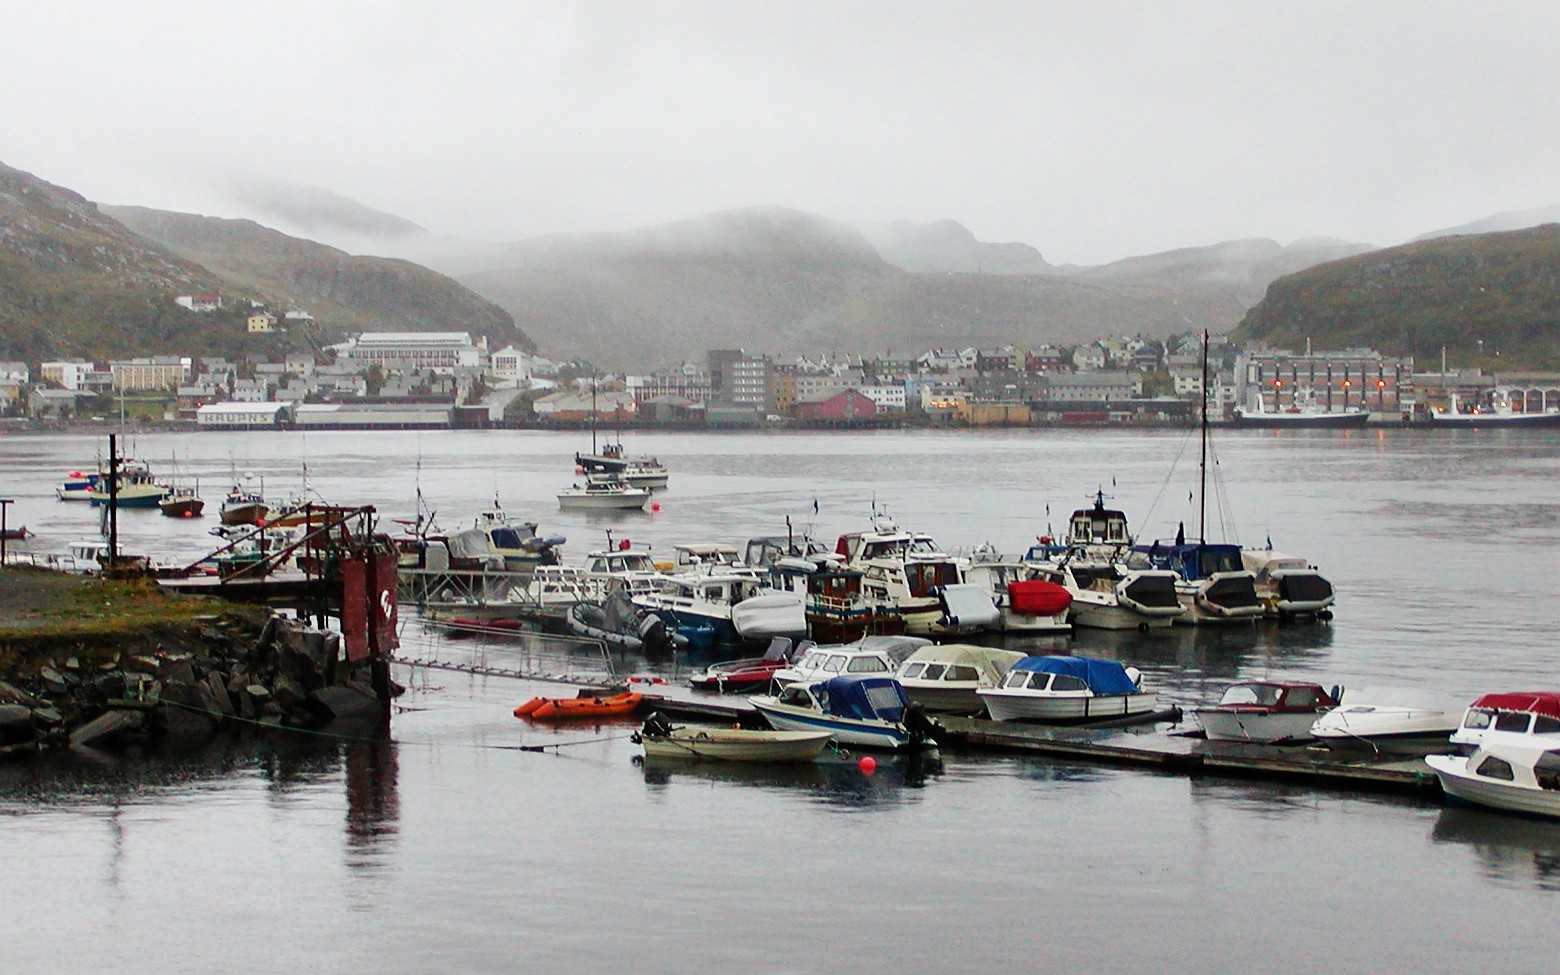 Hammerfest in a rainy afternoon